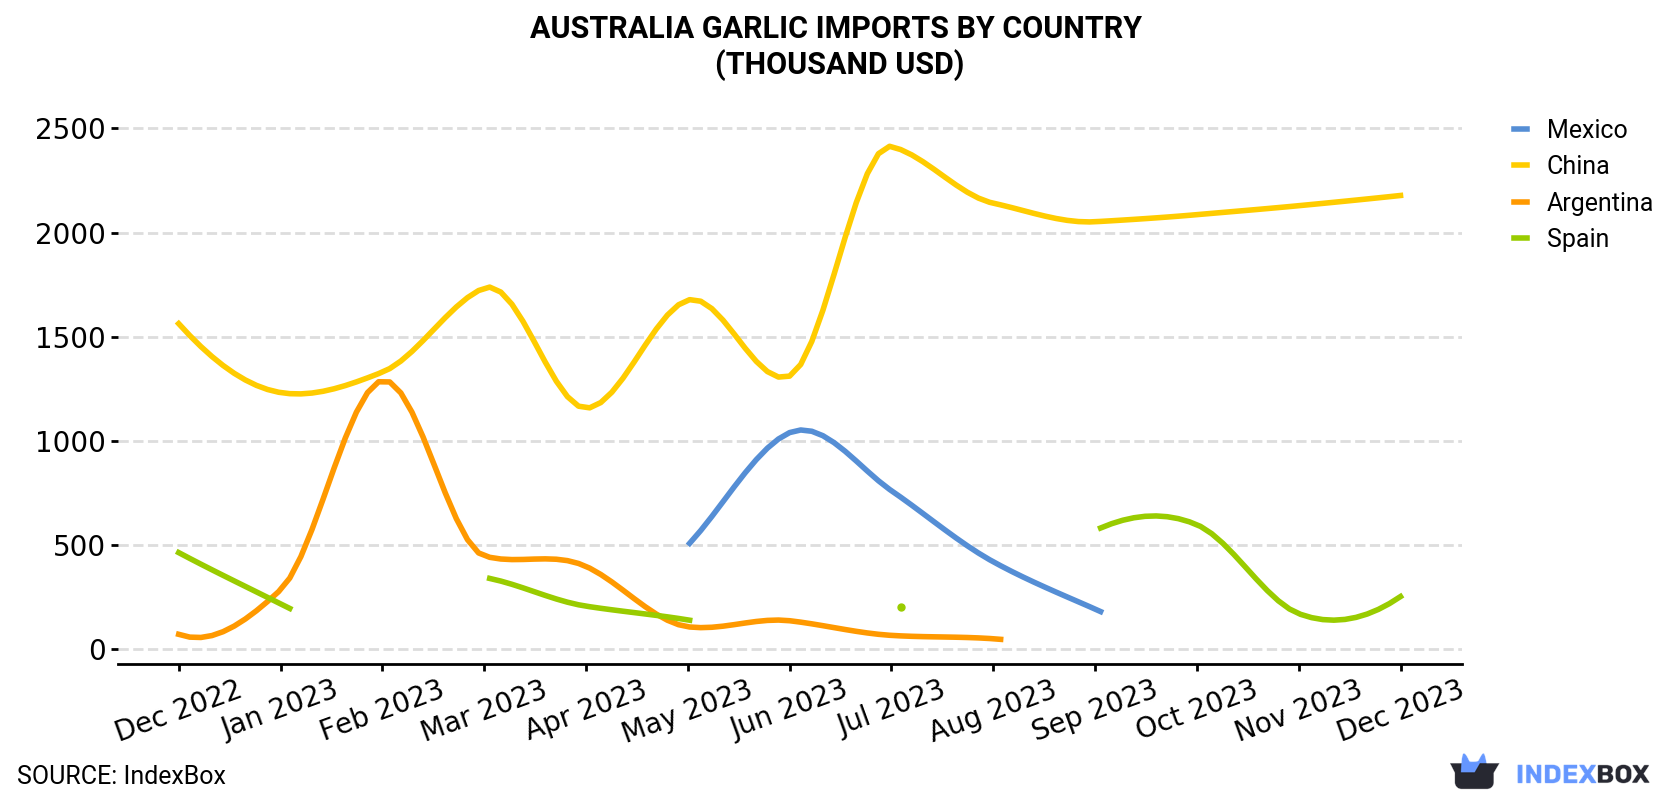 Australia Garlic Imports By Country (Thousand USD)